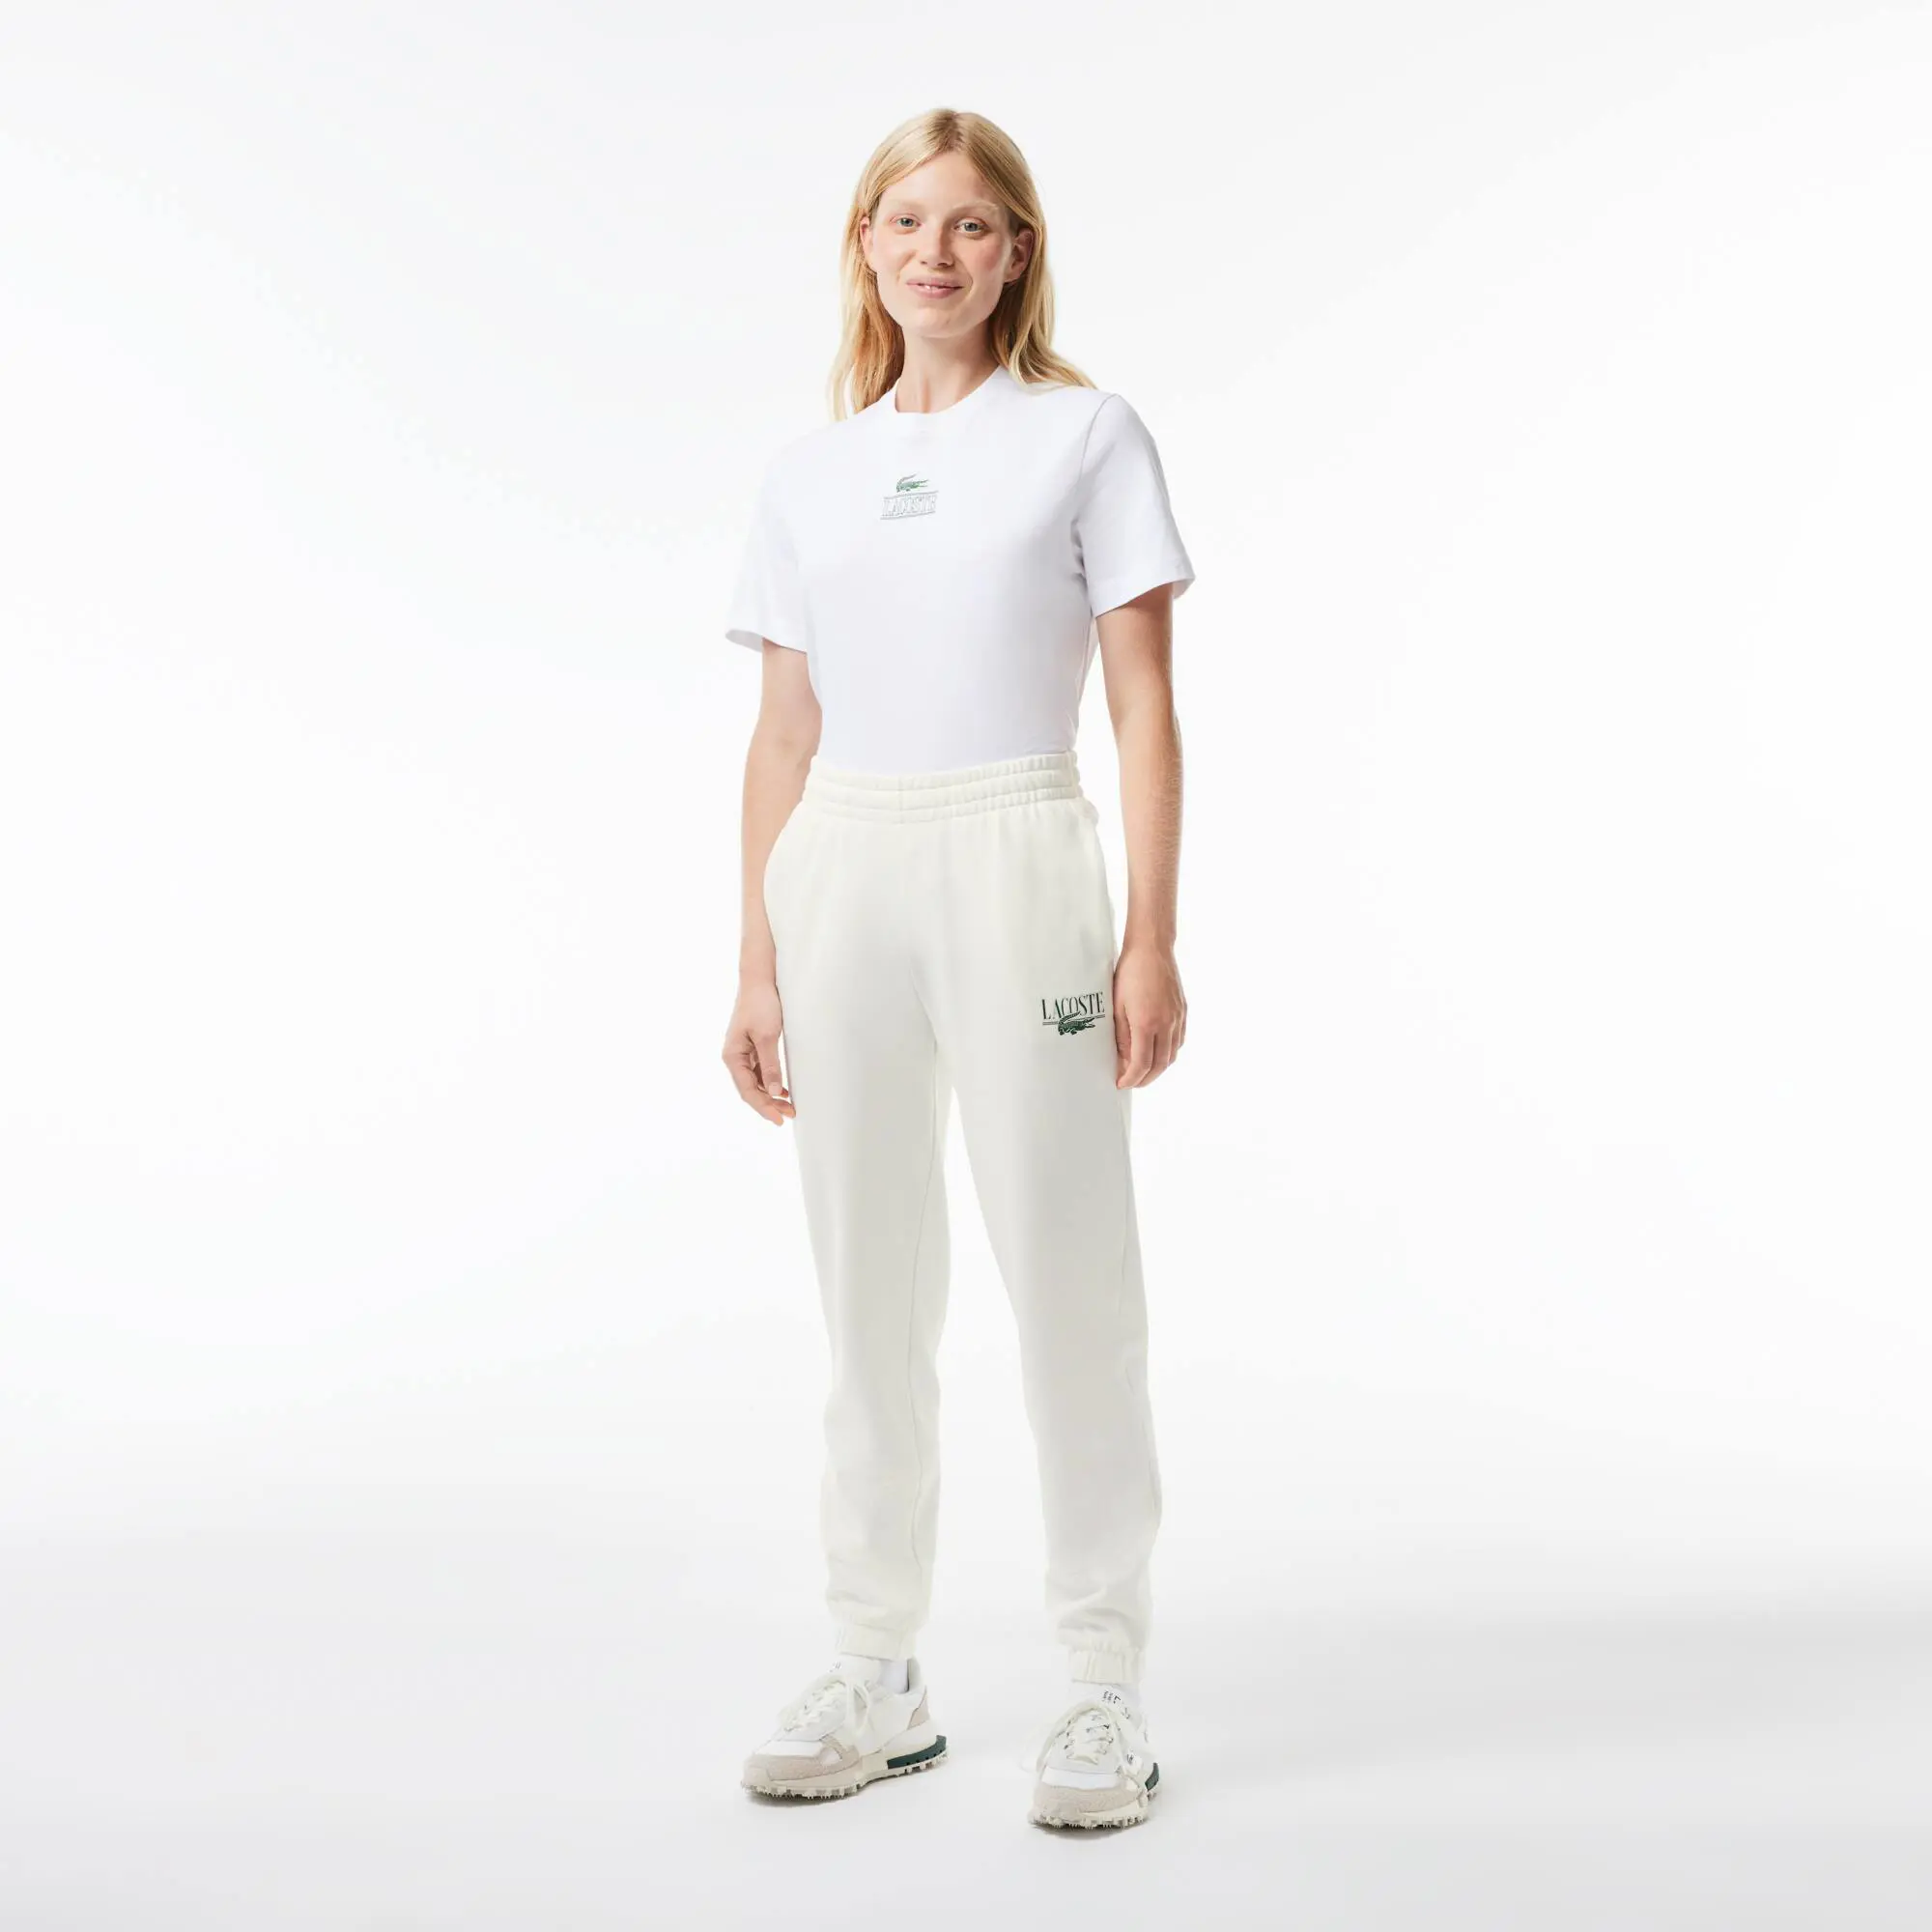 Lacoste Printed Jogger Track Pants. 1